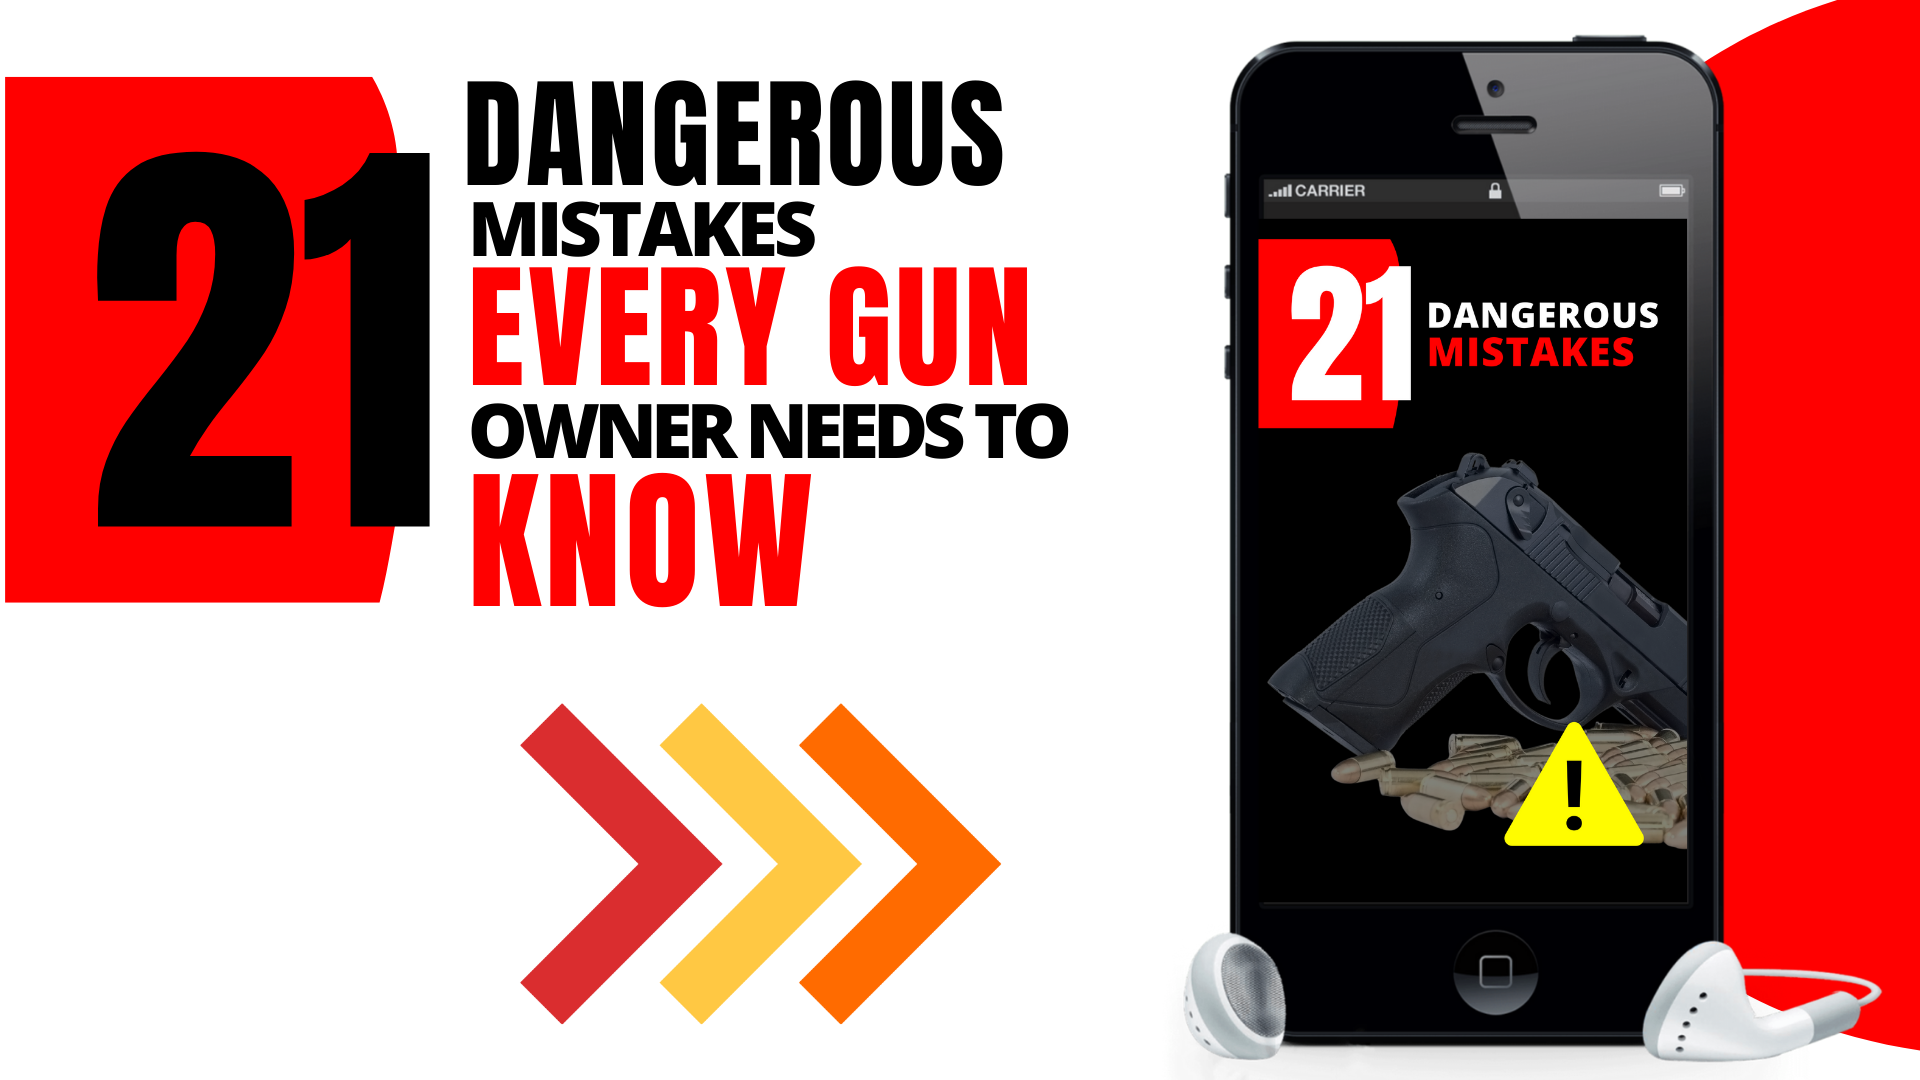 21 Dangerous Mistakes Every Gun Owner Needs To Know